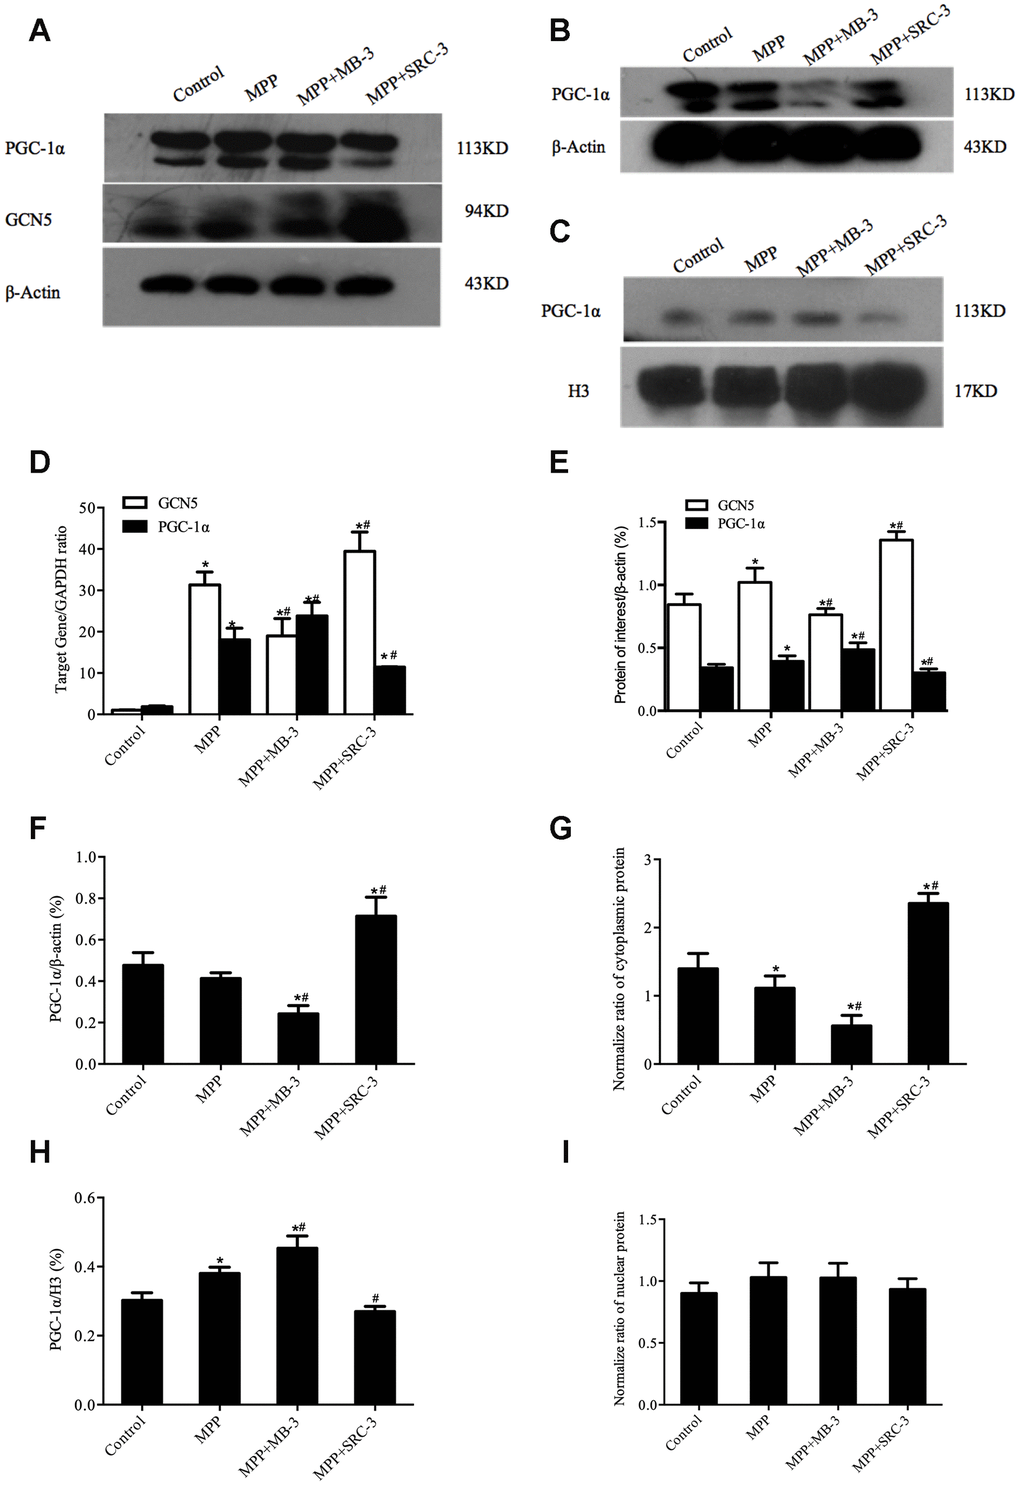 The cytosolic rather than the nuclear distribution of PGC-1α regulated by GCN5 in an MPP+-treated cell model. (A) The protein levels of GCN5 and PGC-1α; (B, C) The cytosolic levels of PGC-1α (B) and the nuclear levels of PGC-1α (C); (D) The relative transcriptional levels of GCN5 and PGC-1α normalized to GAPDH; (E) Semi-quantification of total GCN5 and PGC-1α proteins relative to β-actin; (F, H) Semi-quantification of the cytosolic (F) and the nuclear (H) PGC-1α proteins relative to β-actin; (G, I) The normalized cytosolic (G) and nuclear (I) proteins relative to the total protein; n=6, per group. * P vs. Control; # P vs. MPP+.